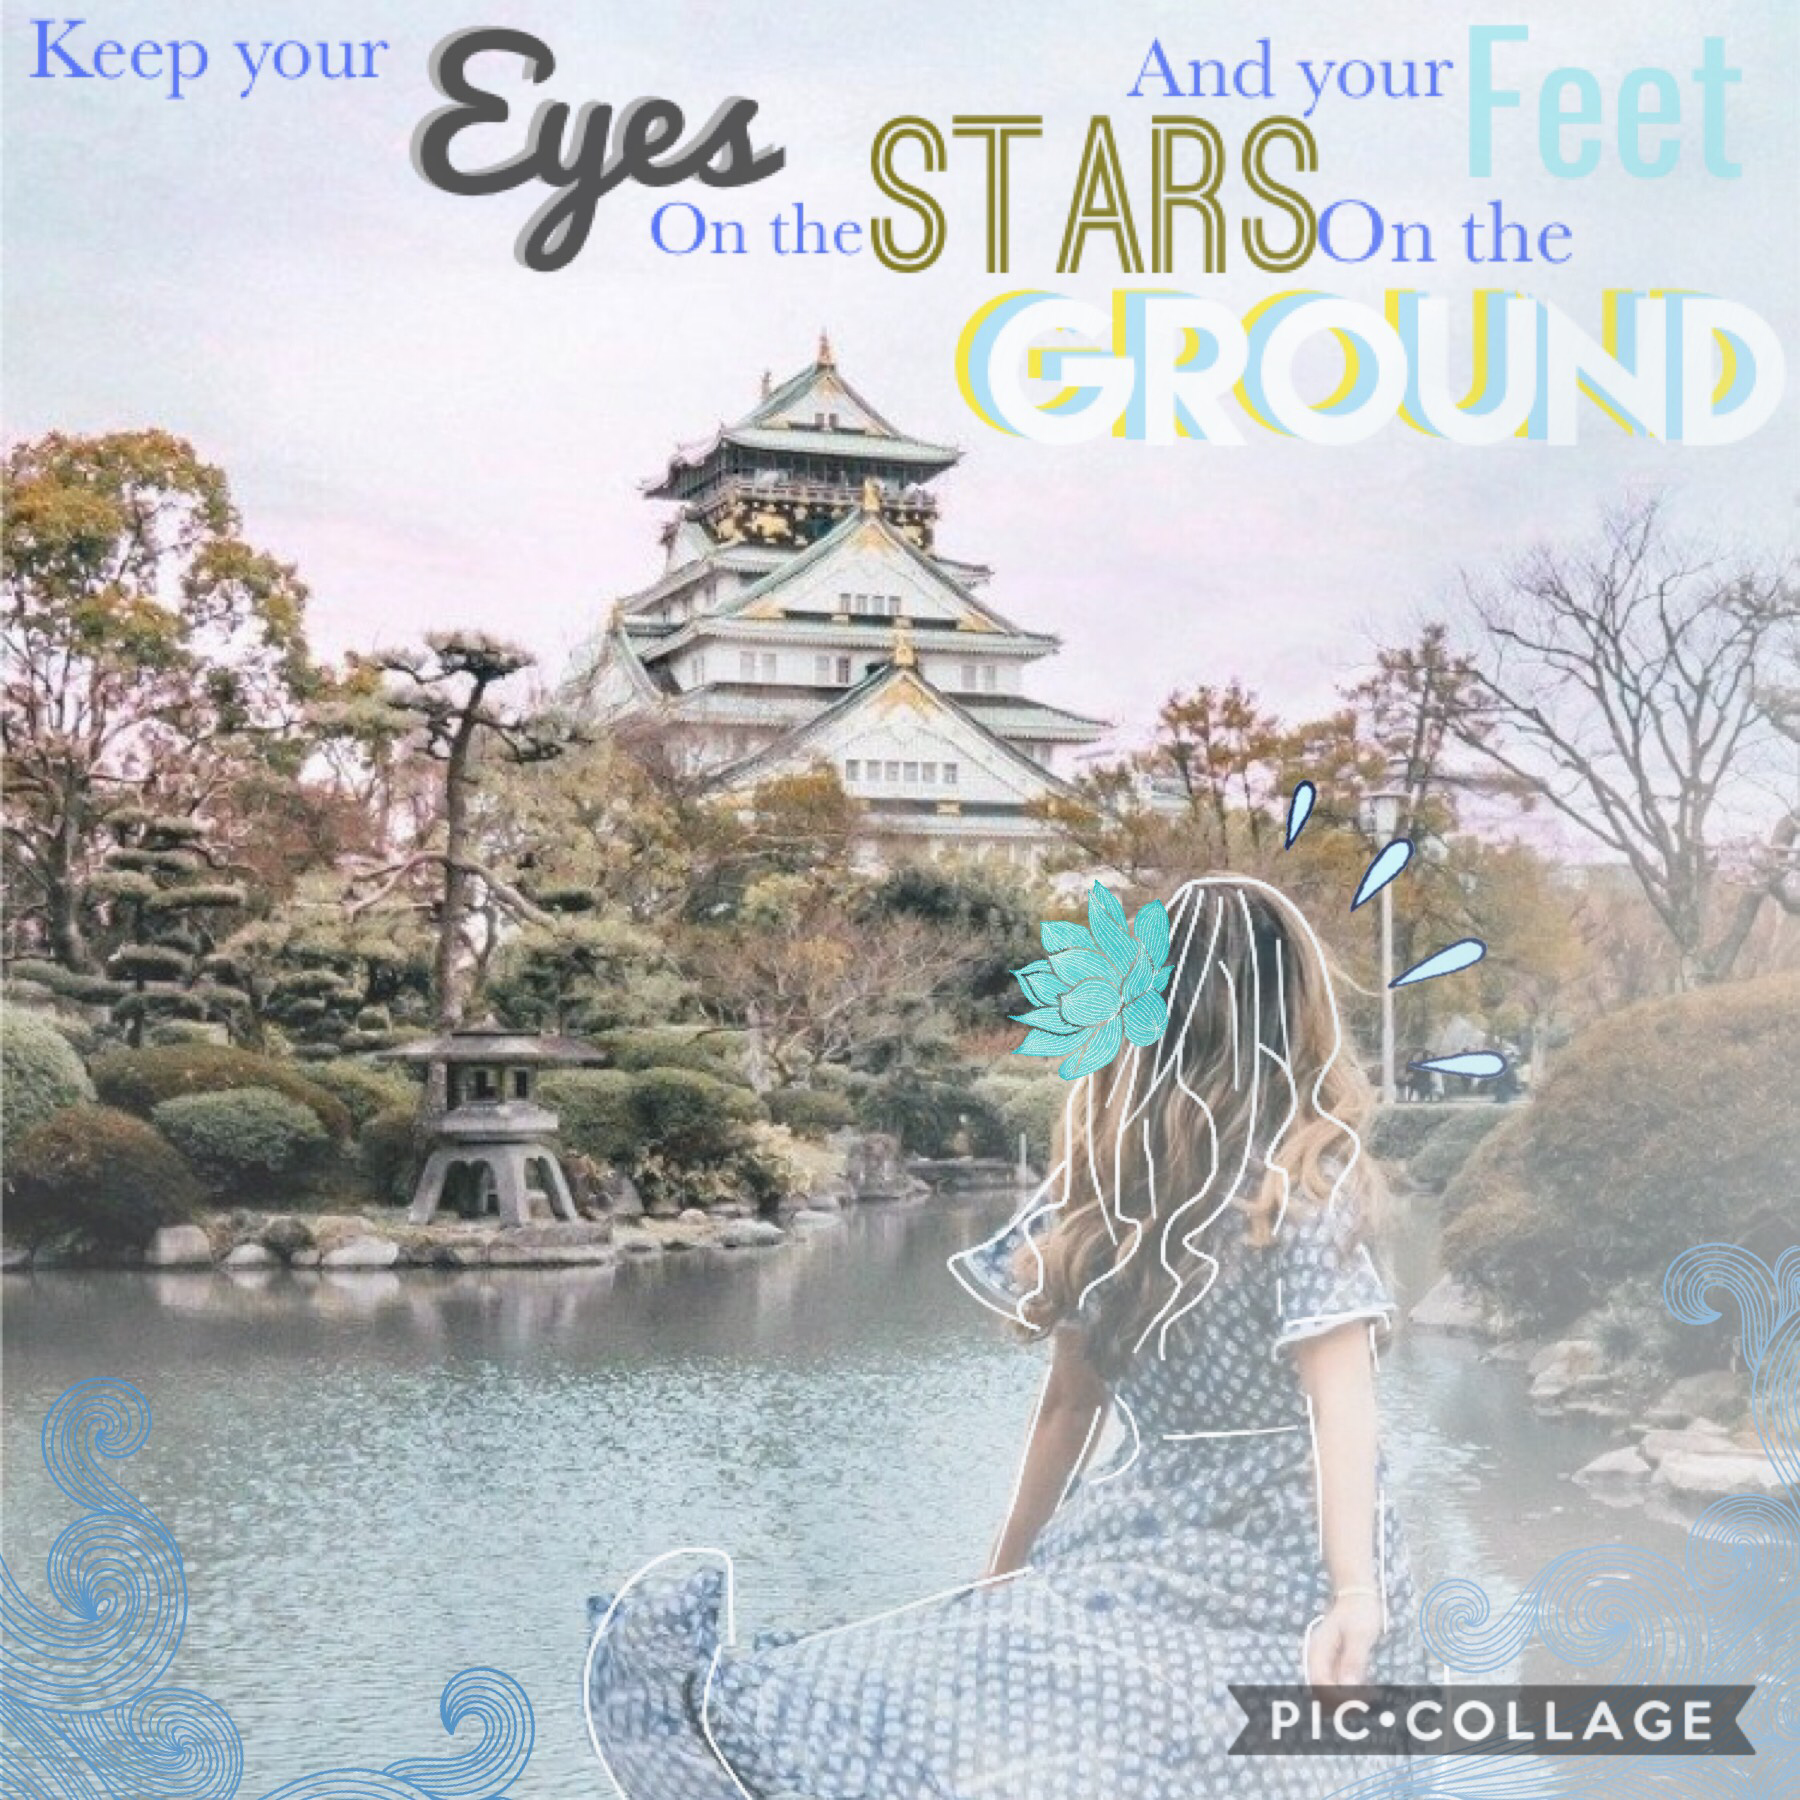 🏞Keep your eyes on the stars and your feet on the ground🏞